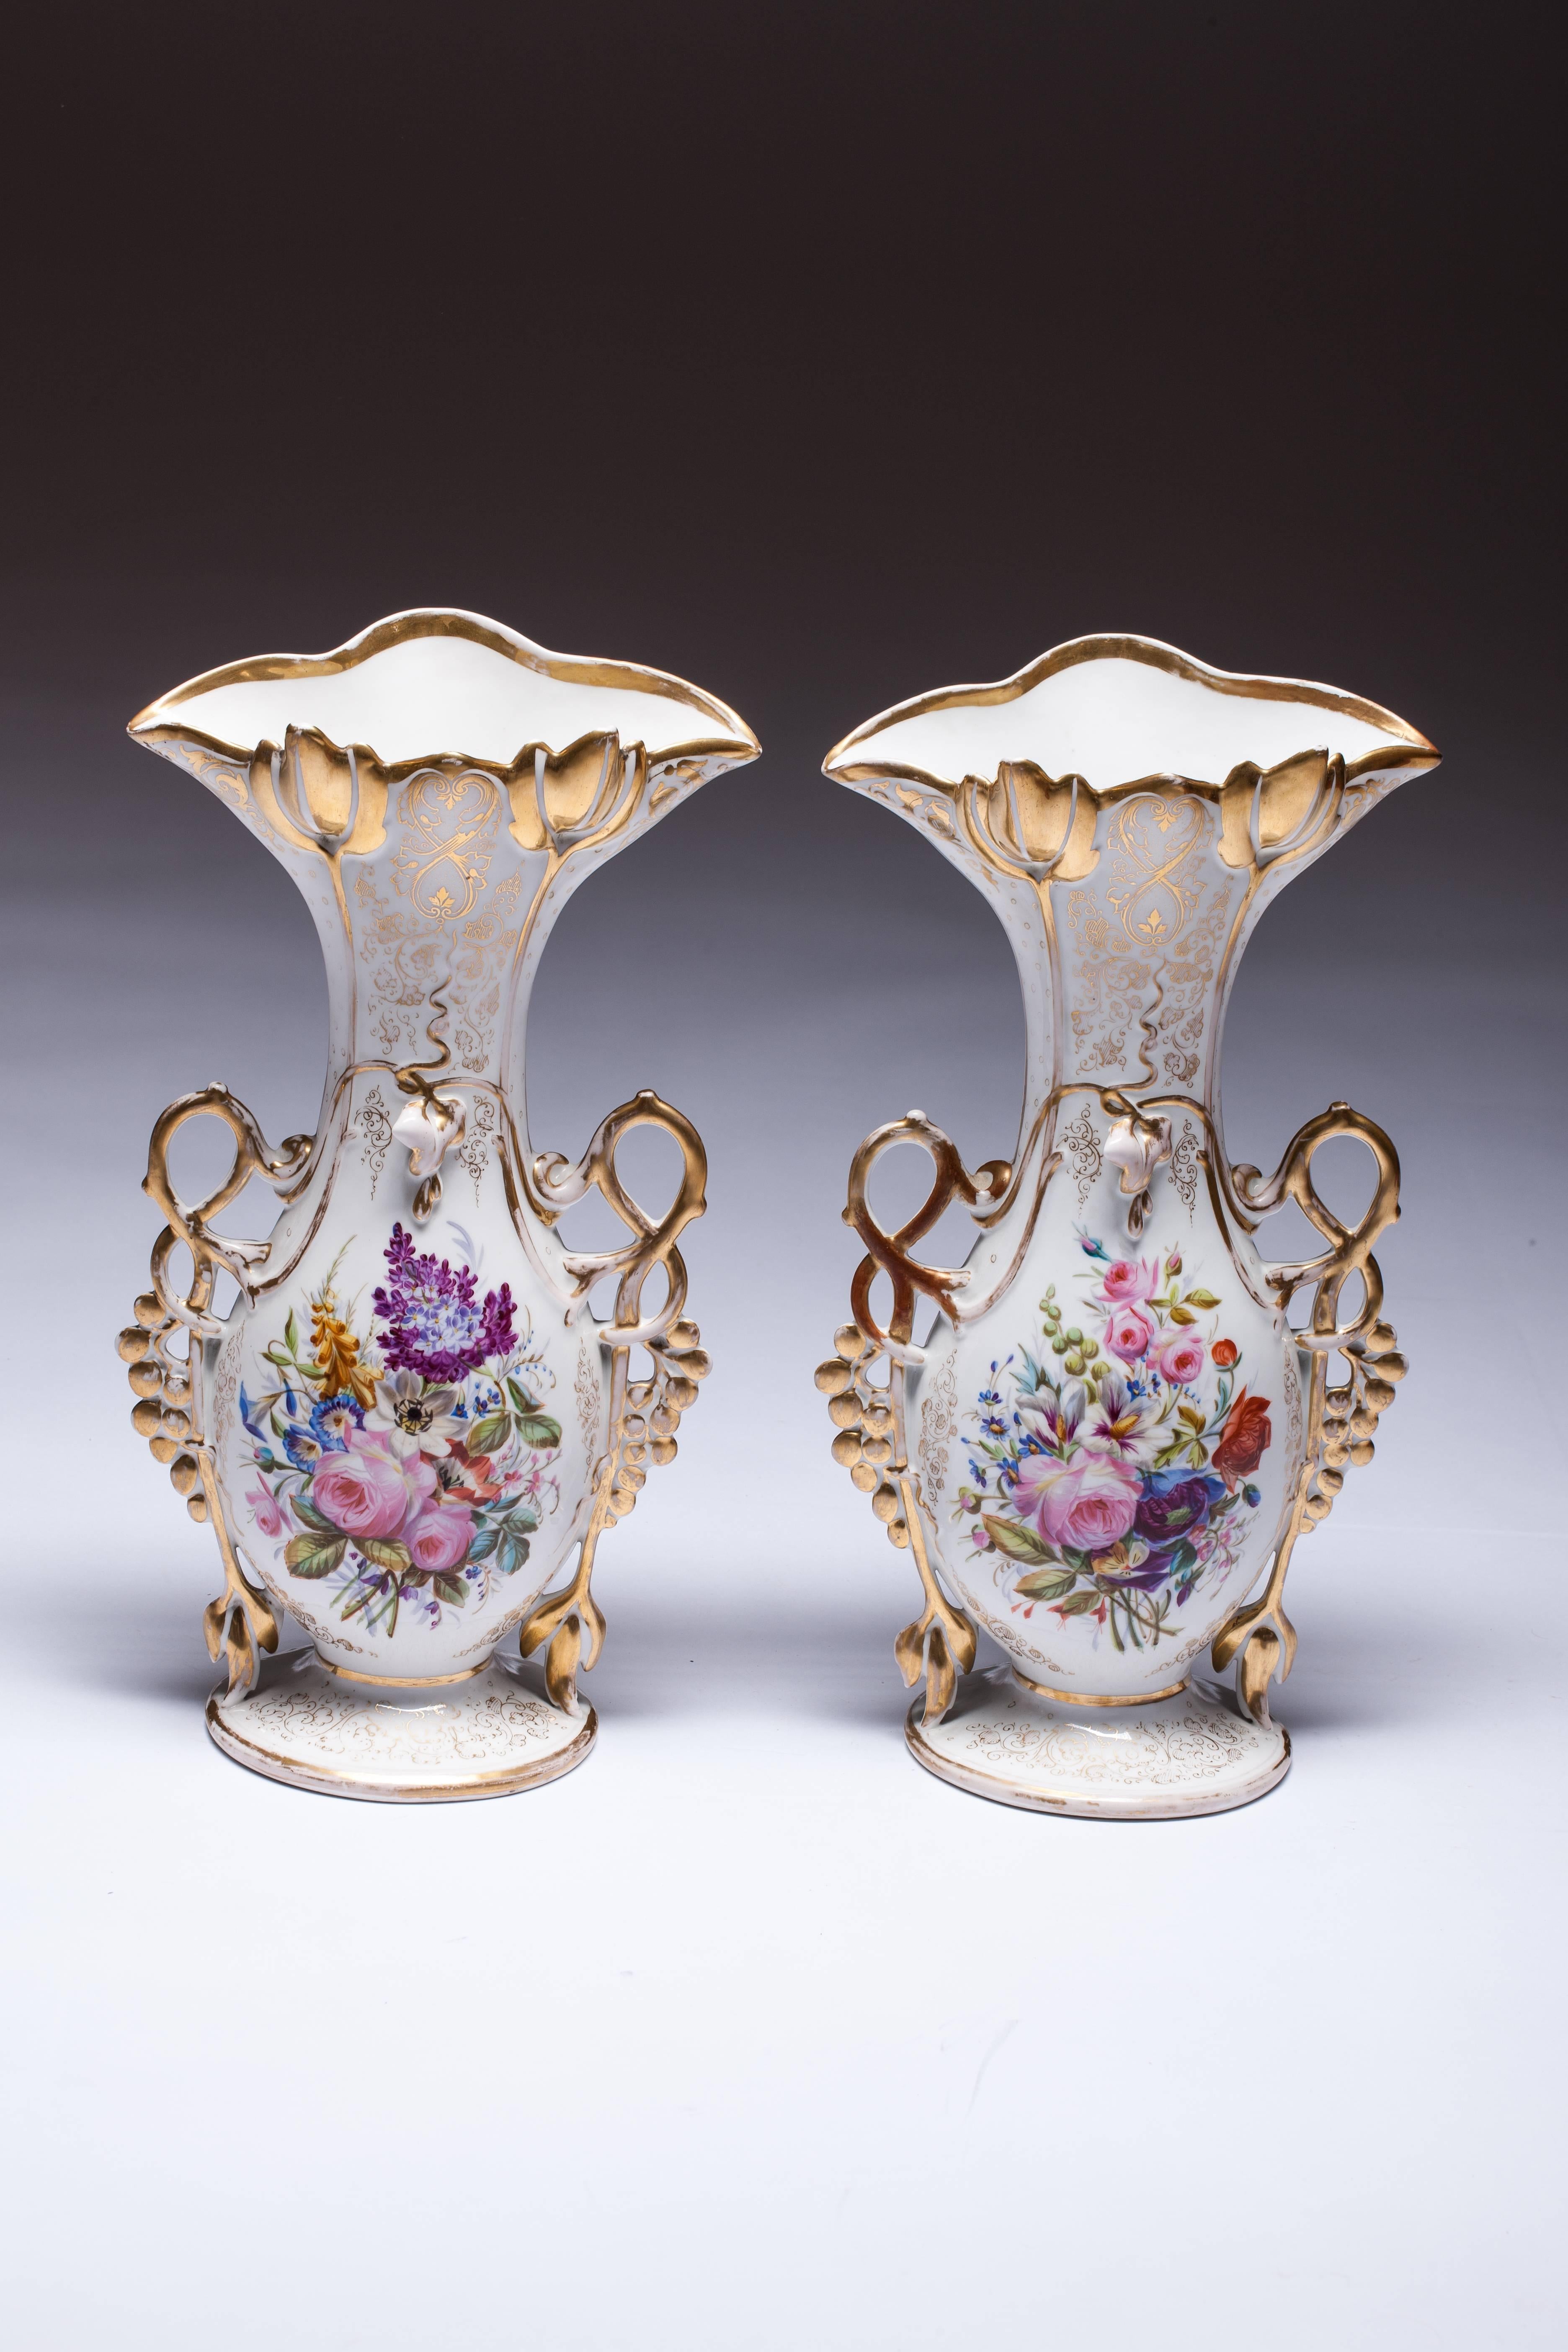 This is a highly ornamental pair of Old Paris porcelain mantel vases decorated with heavy gold, applied morning glory flowers, and hand-painted scenes of flower bouquets. 

These are a perfect example of Rococo ornamental wares made in the